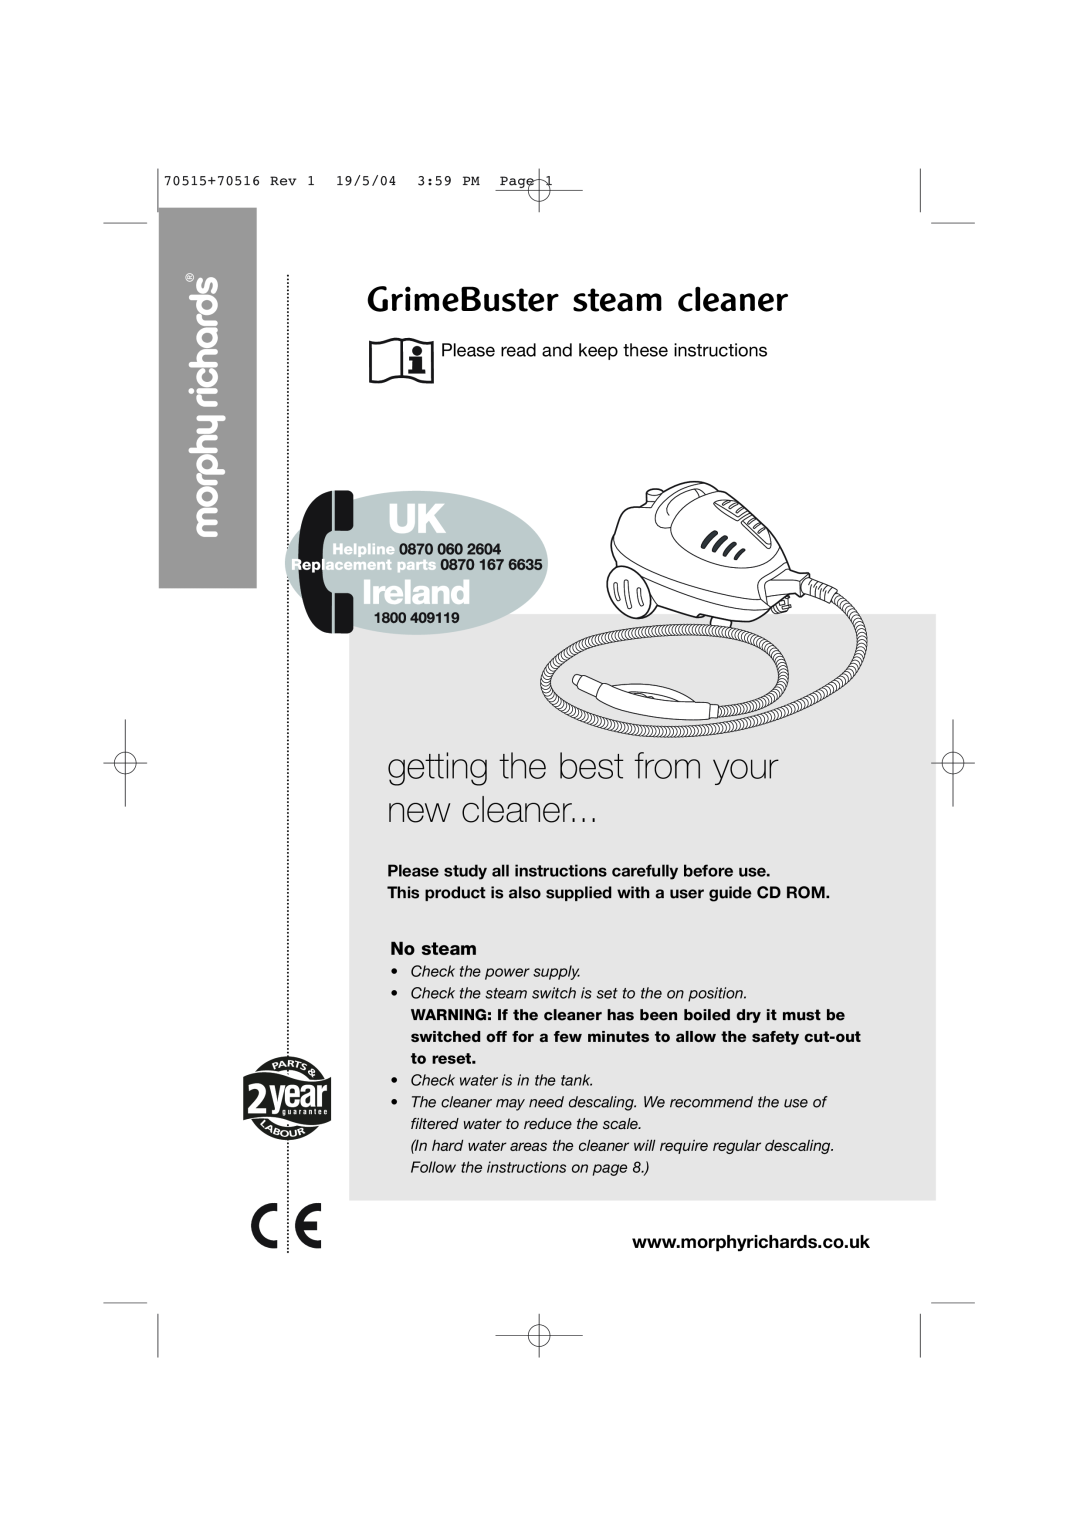 Morphy Richards GrimeBuster steam cleaner manual No steam, getting the best from your new cleaner 